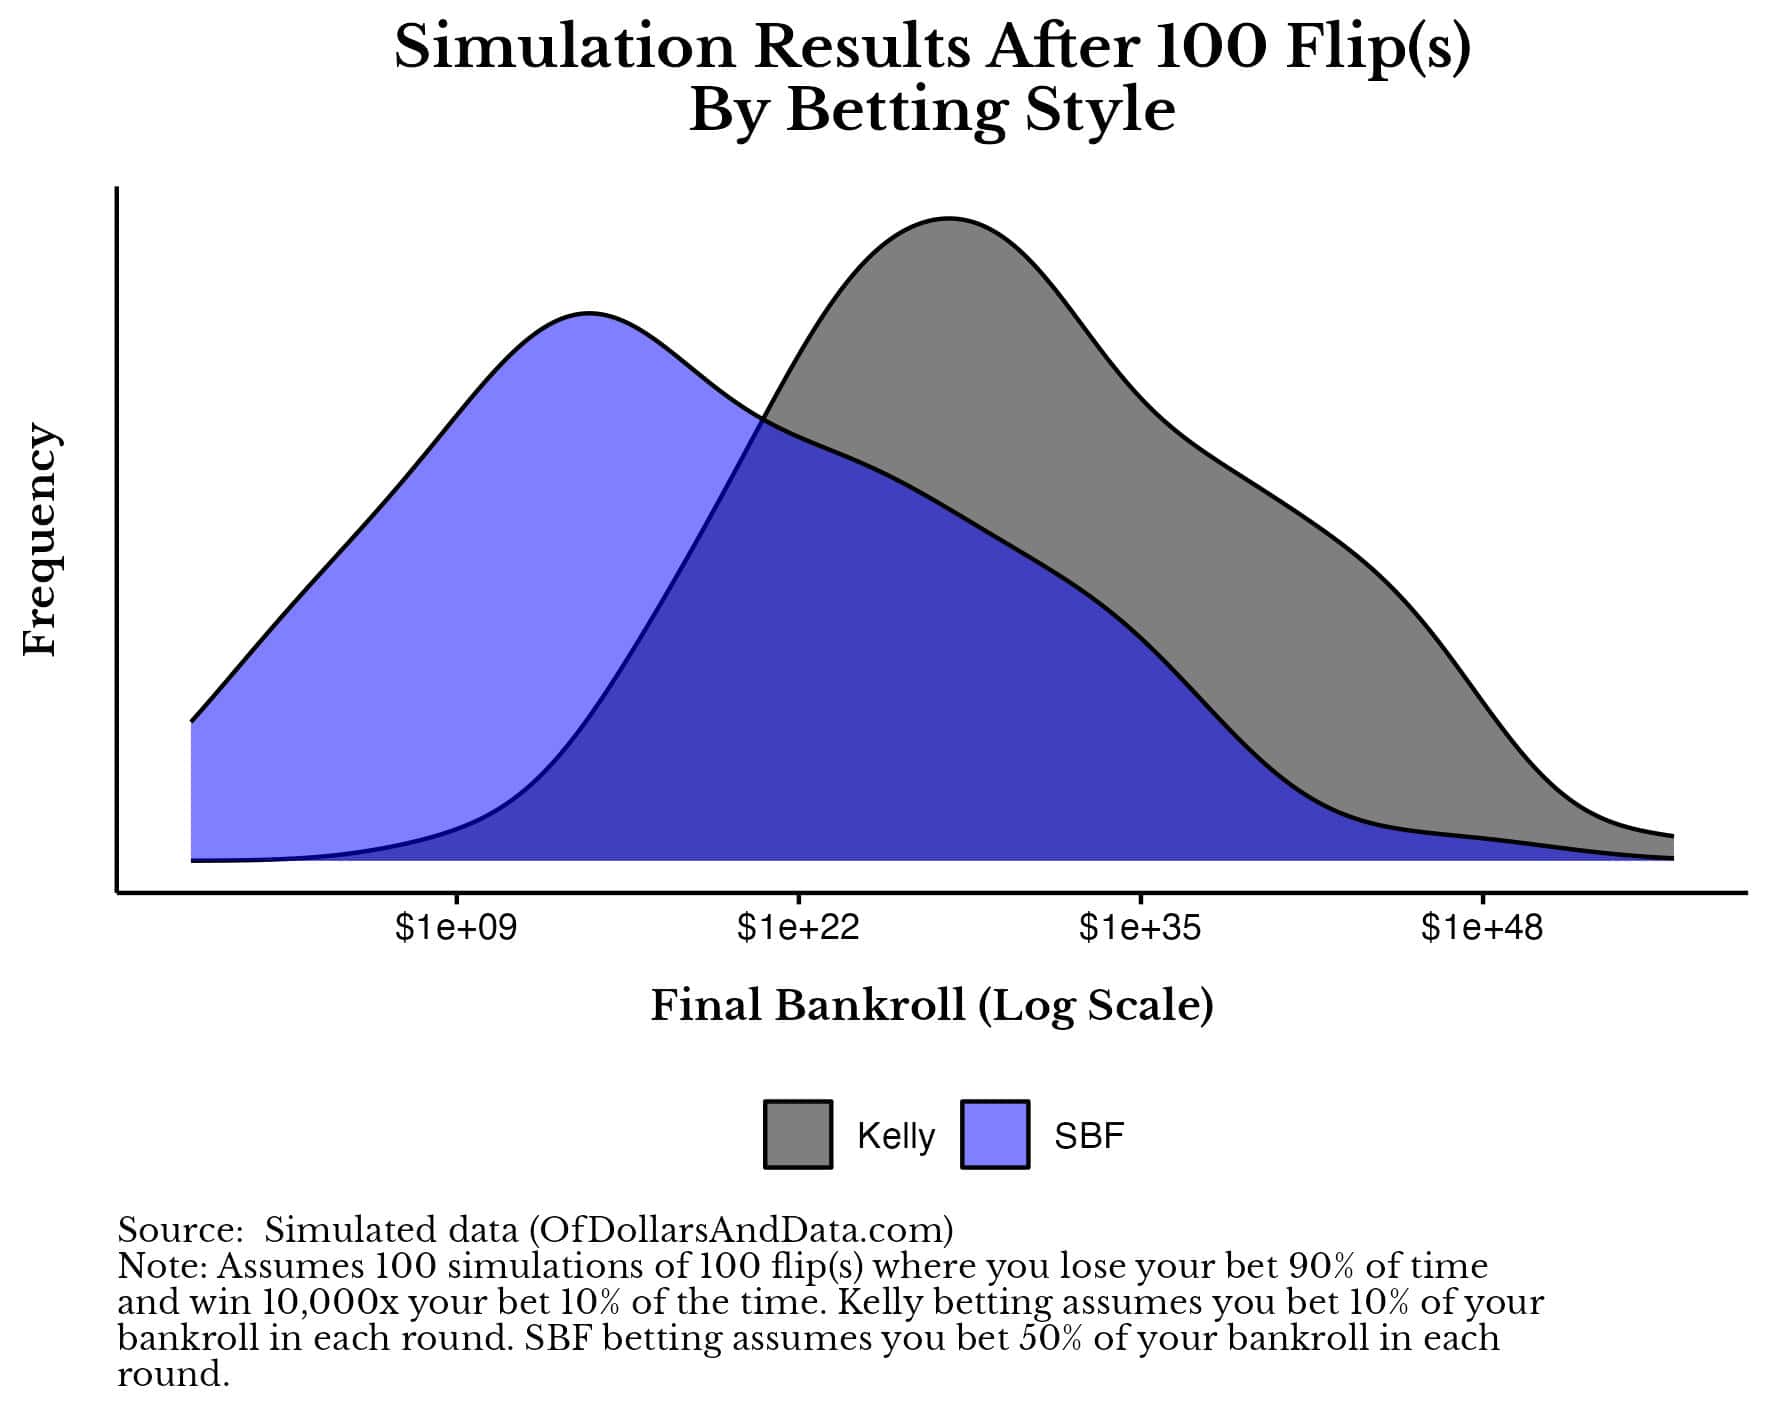 Chart of Kelly vs. SBF betting style for 100 flip game.